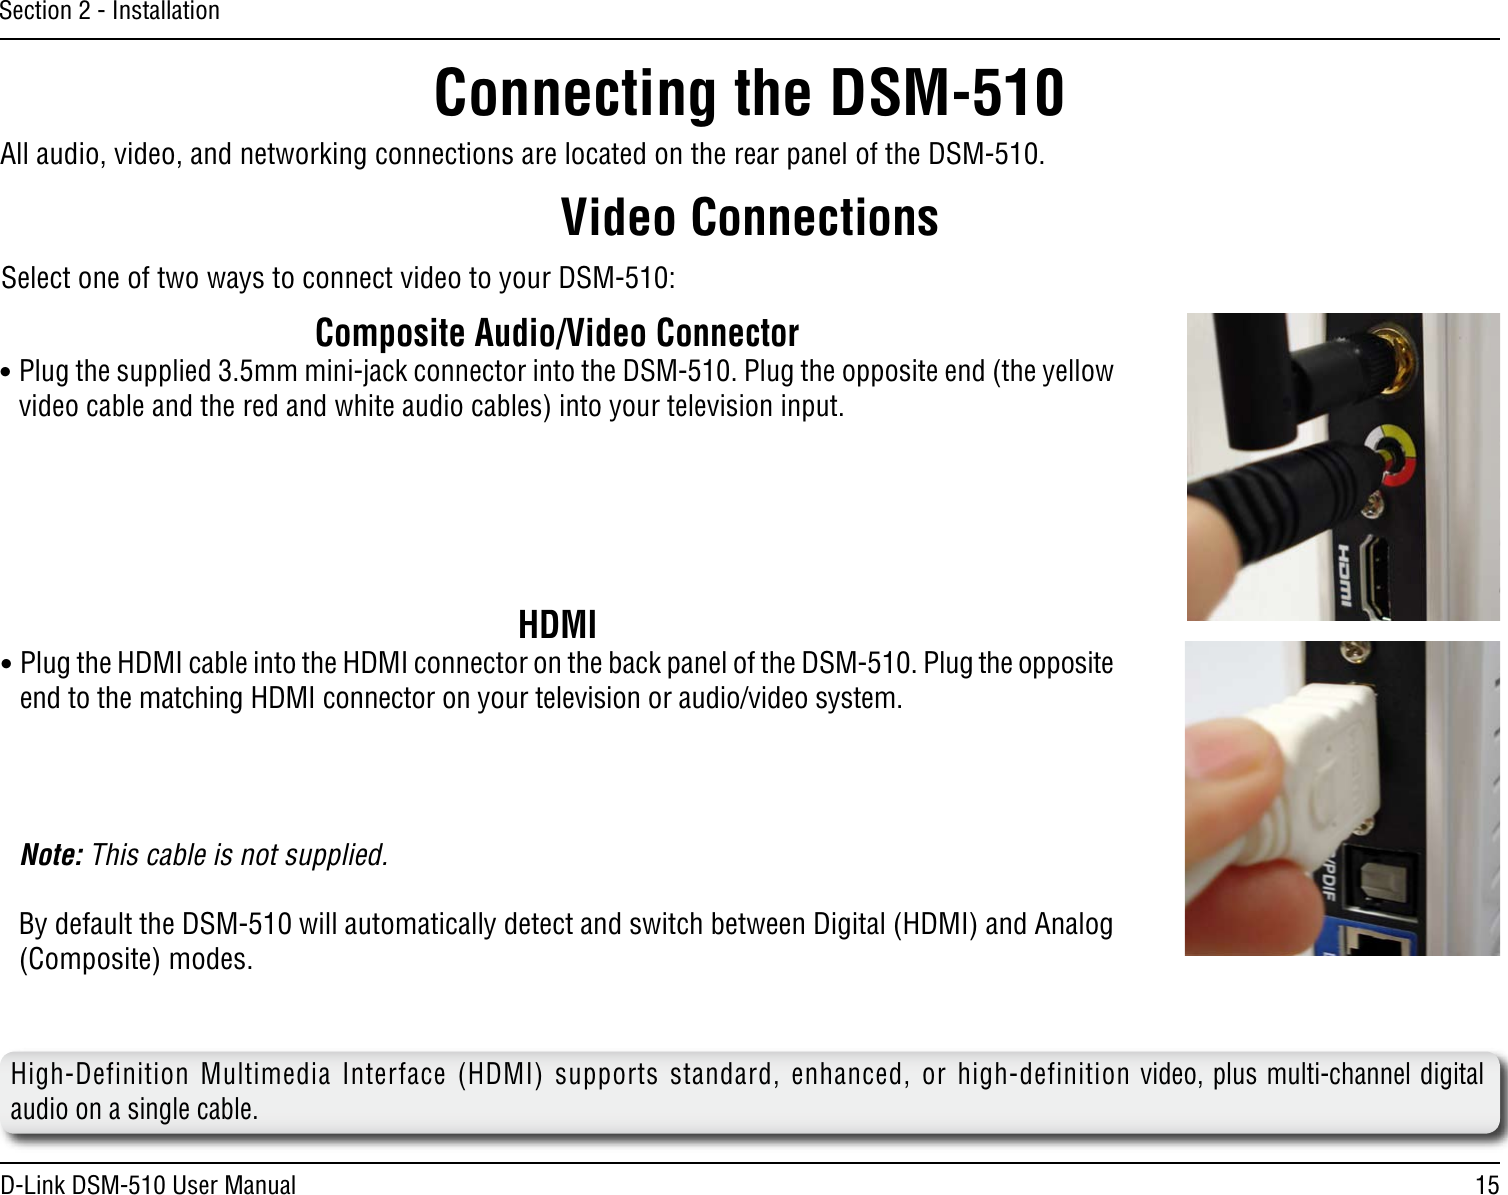 15D-Link DSM-510 User ManualSection 2 - InstallationAll audio, video, and networking connections are located on the rear panel of the DSM-510. Composite Audio/Video Connector• Plug the supplied 3.5mm mini-jack connector into the DSM-510. Plug the opposite end (the yellow video cable and the red and white audio cables) into your television input.Video ConnectionsSelect one of two ways to connect video to your DSM-510:Connecting the DSM-510HDMI• Plug the HDMI cable into the HDMI connector on the back panel of the DSM-510. Plug the opposite end to the matching HDMI connector on your television or audio/video system. Note: This cable is not supplied.   By default the DSM-510 will automatically detect and switch between Digital (HDMI) and Analog (Composite) modes.   High-Definition Multimedia Interface (HDMI) supports standard, enhanced, or high-definition video, plus multi-channel digital audio on a single cable.